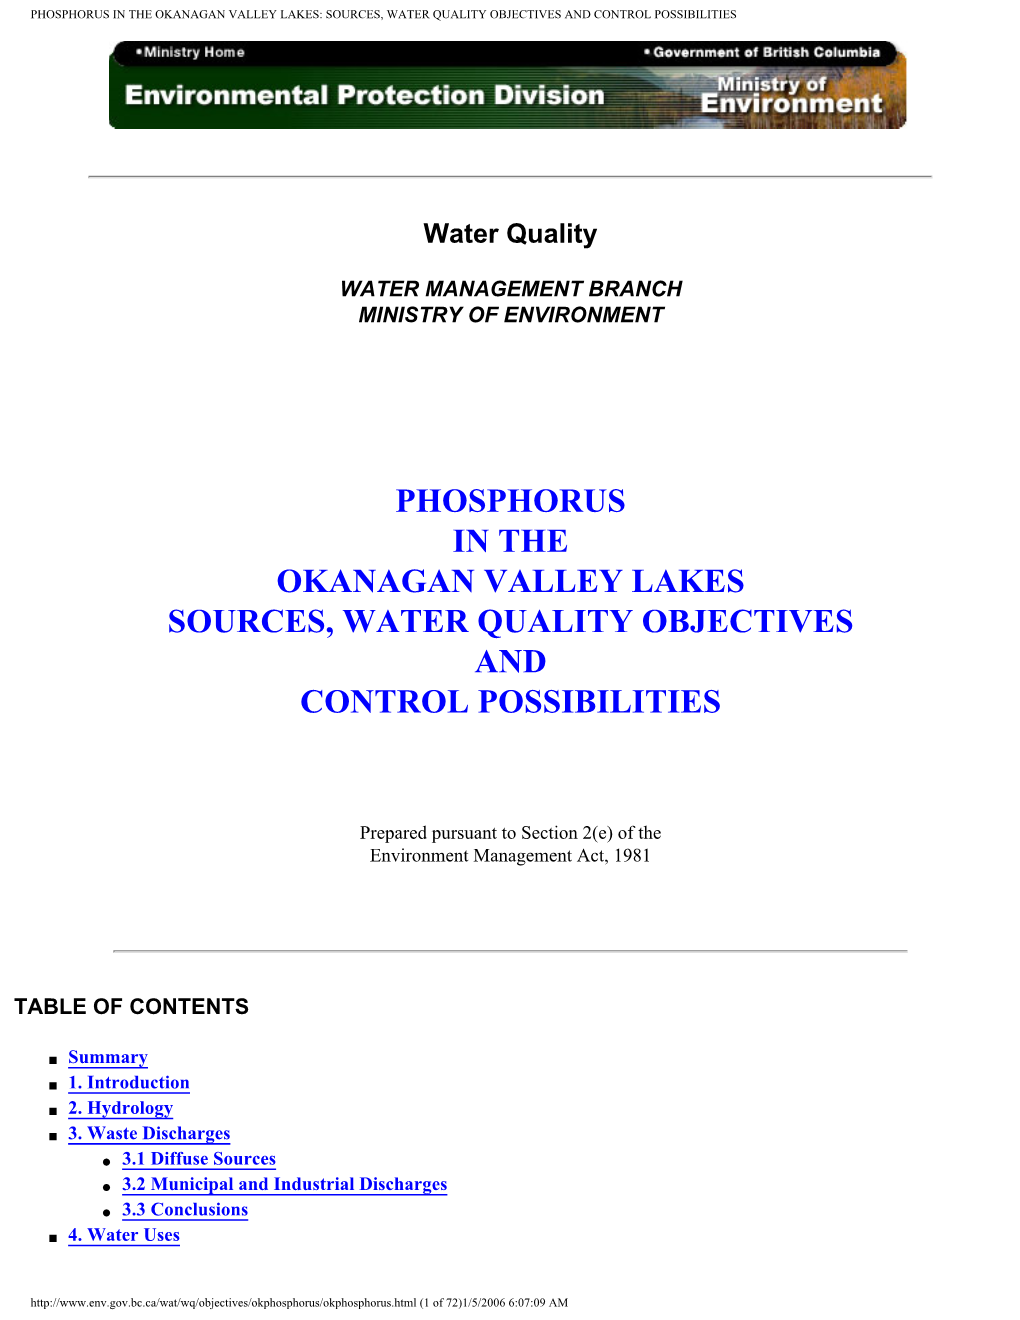 Phosphorus in the Okanagan Valley Lakes: Sources, Water Quality Objectives and Control Possibilities